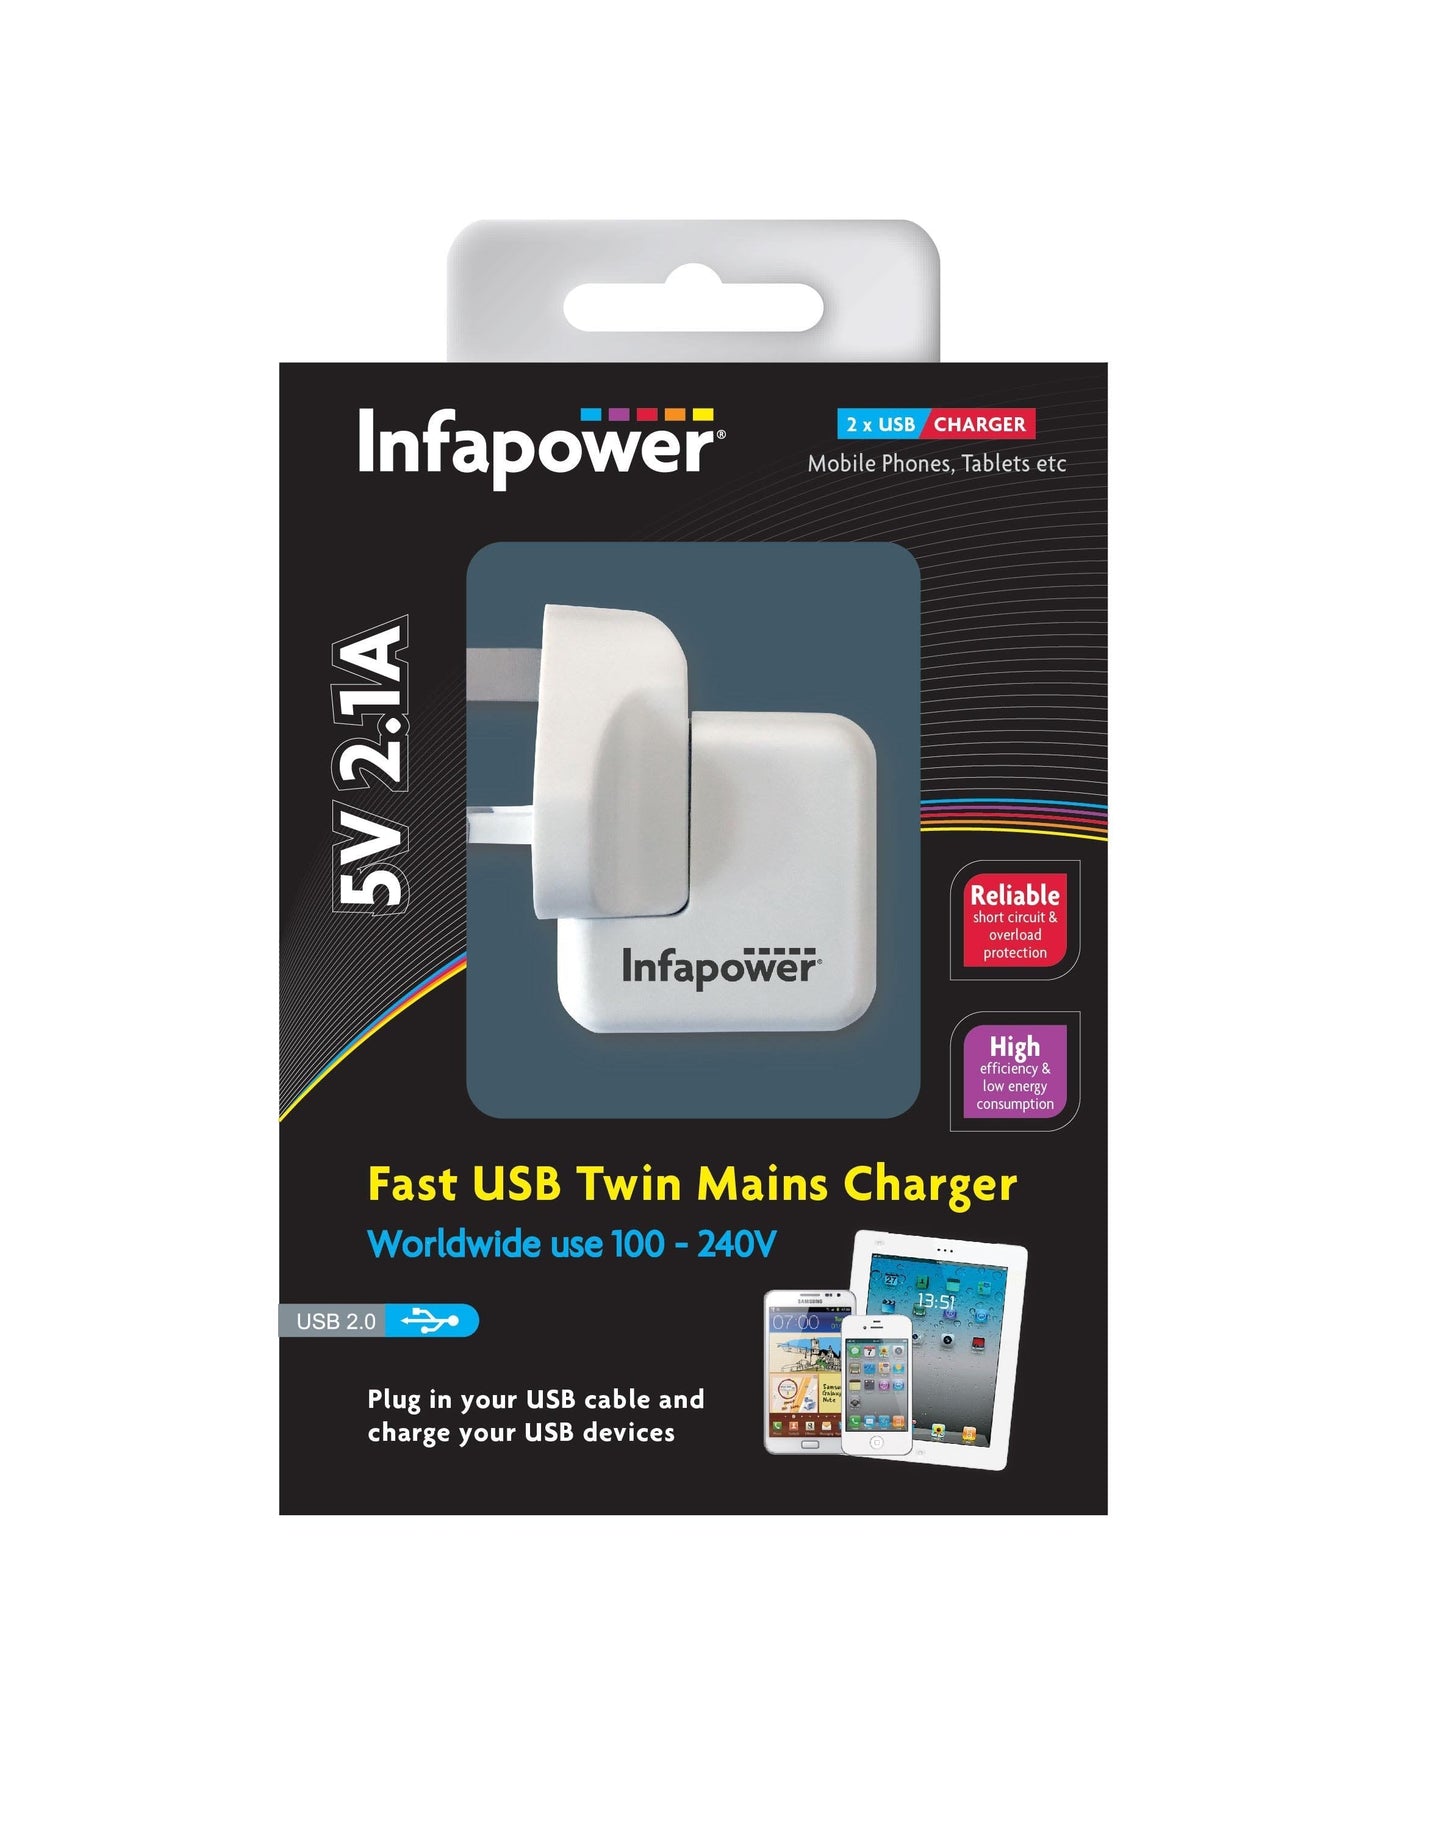 Infapower Fast USB Twins Mains Charger 5v Short Circuit Protection P041 (Parcel Rate)